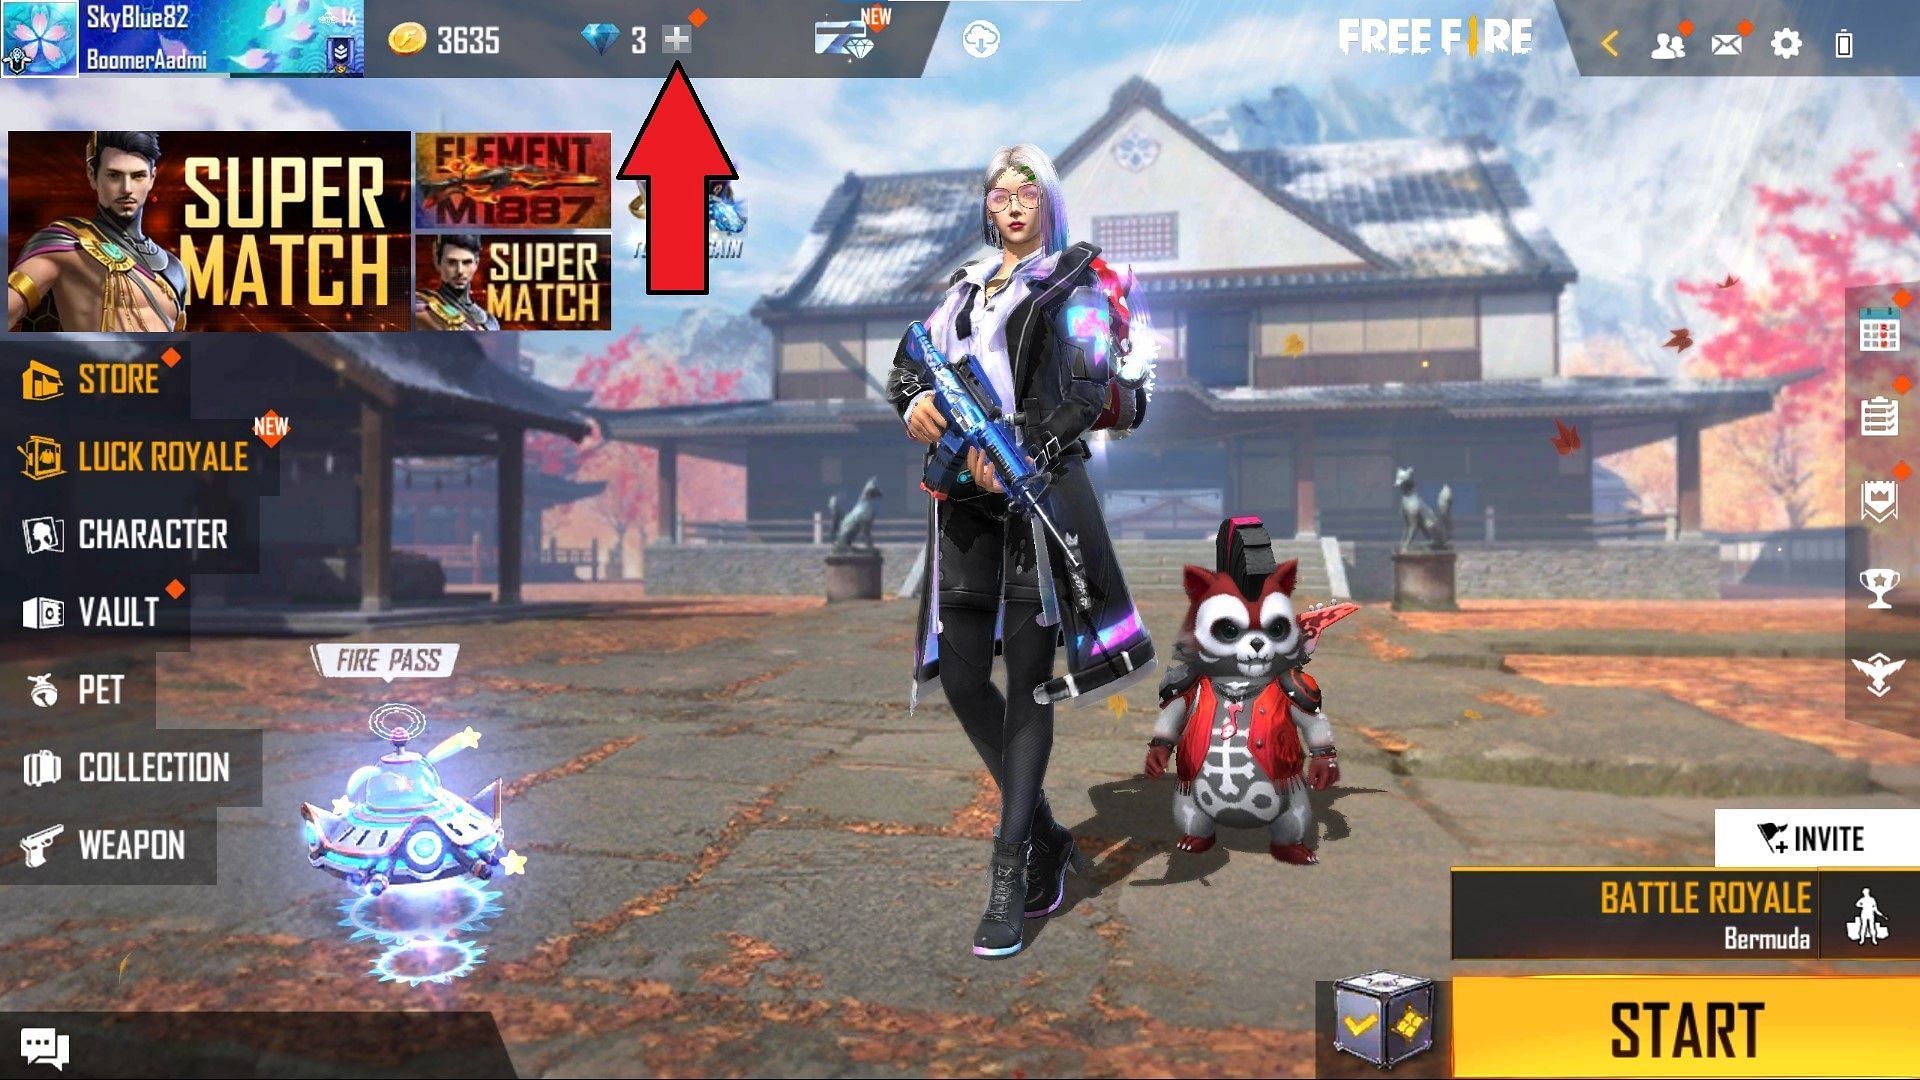 Tap here to reach the in-game top-up center (Image via Garena)